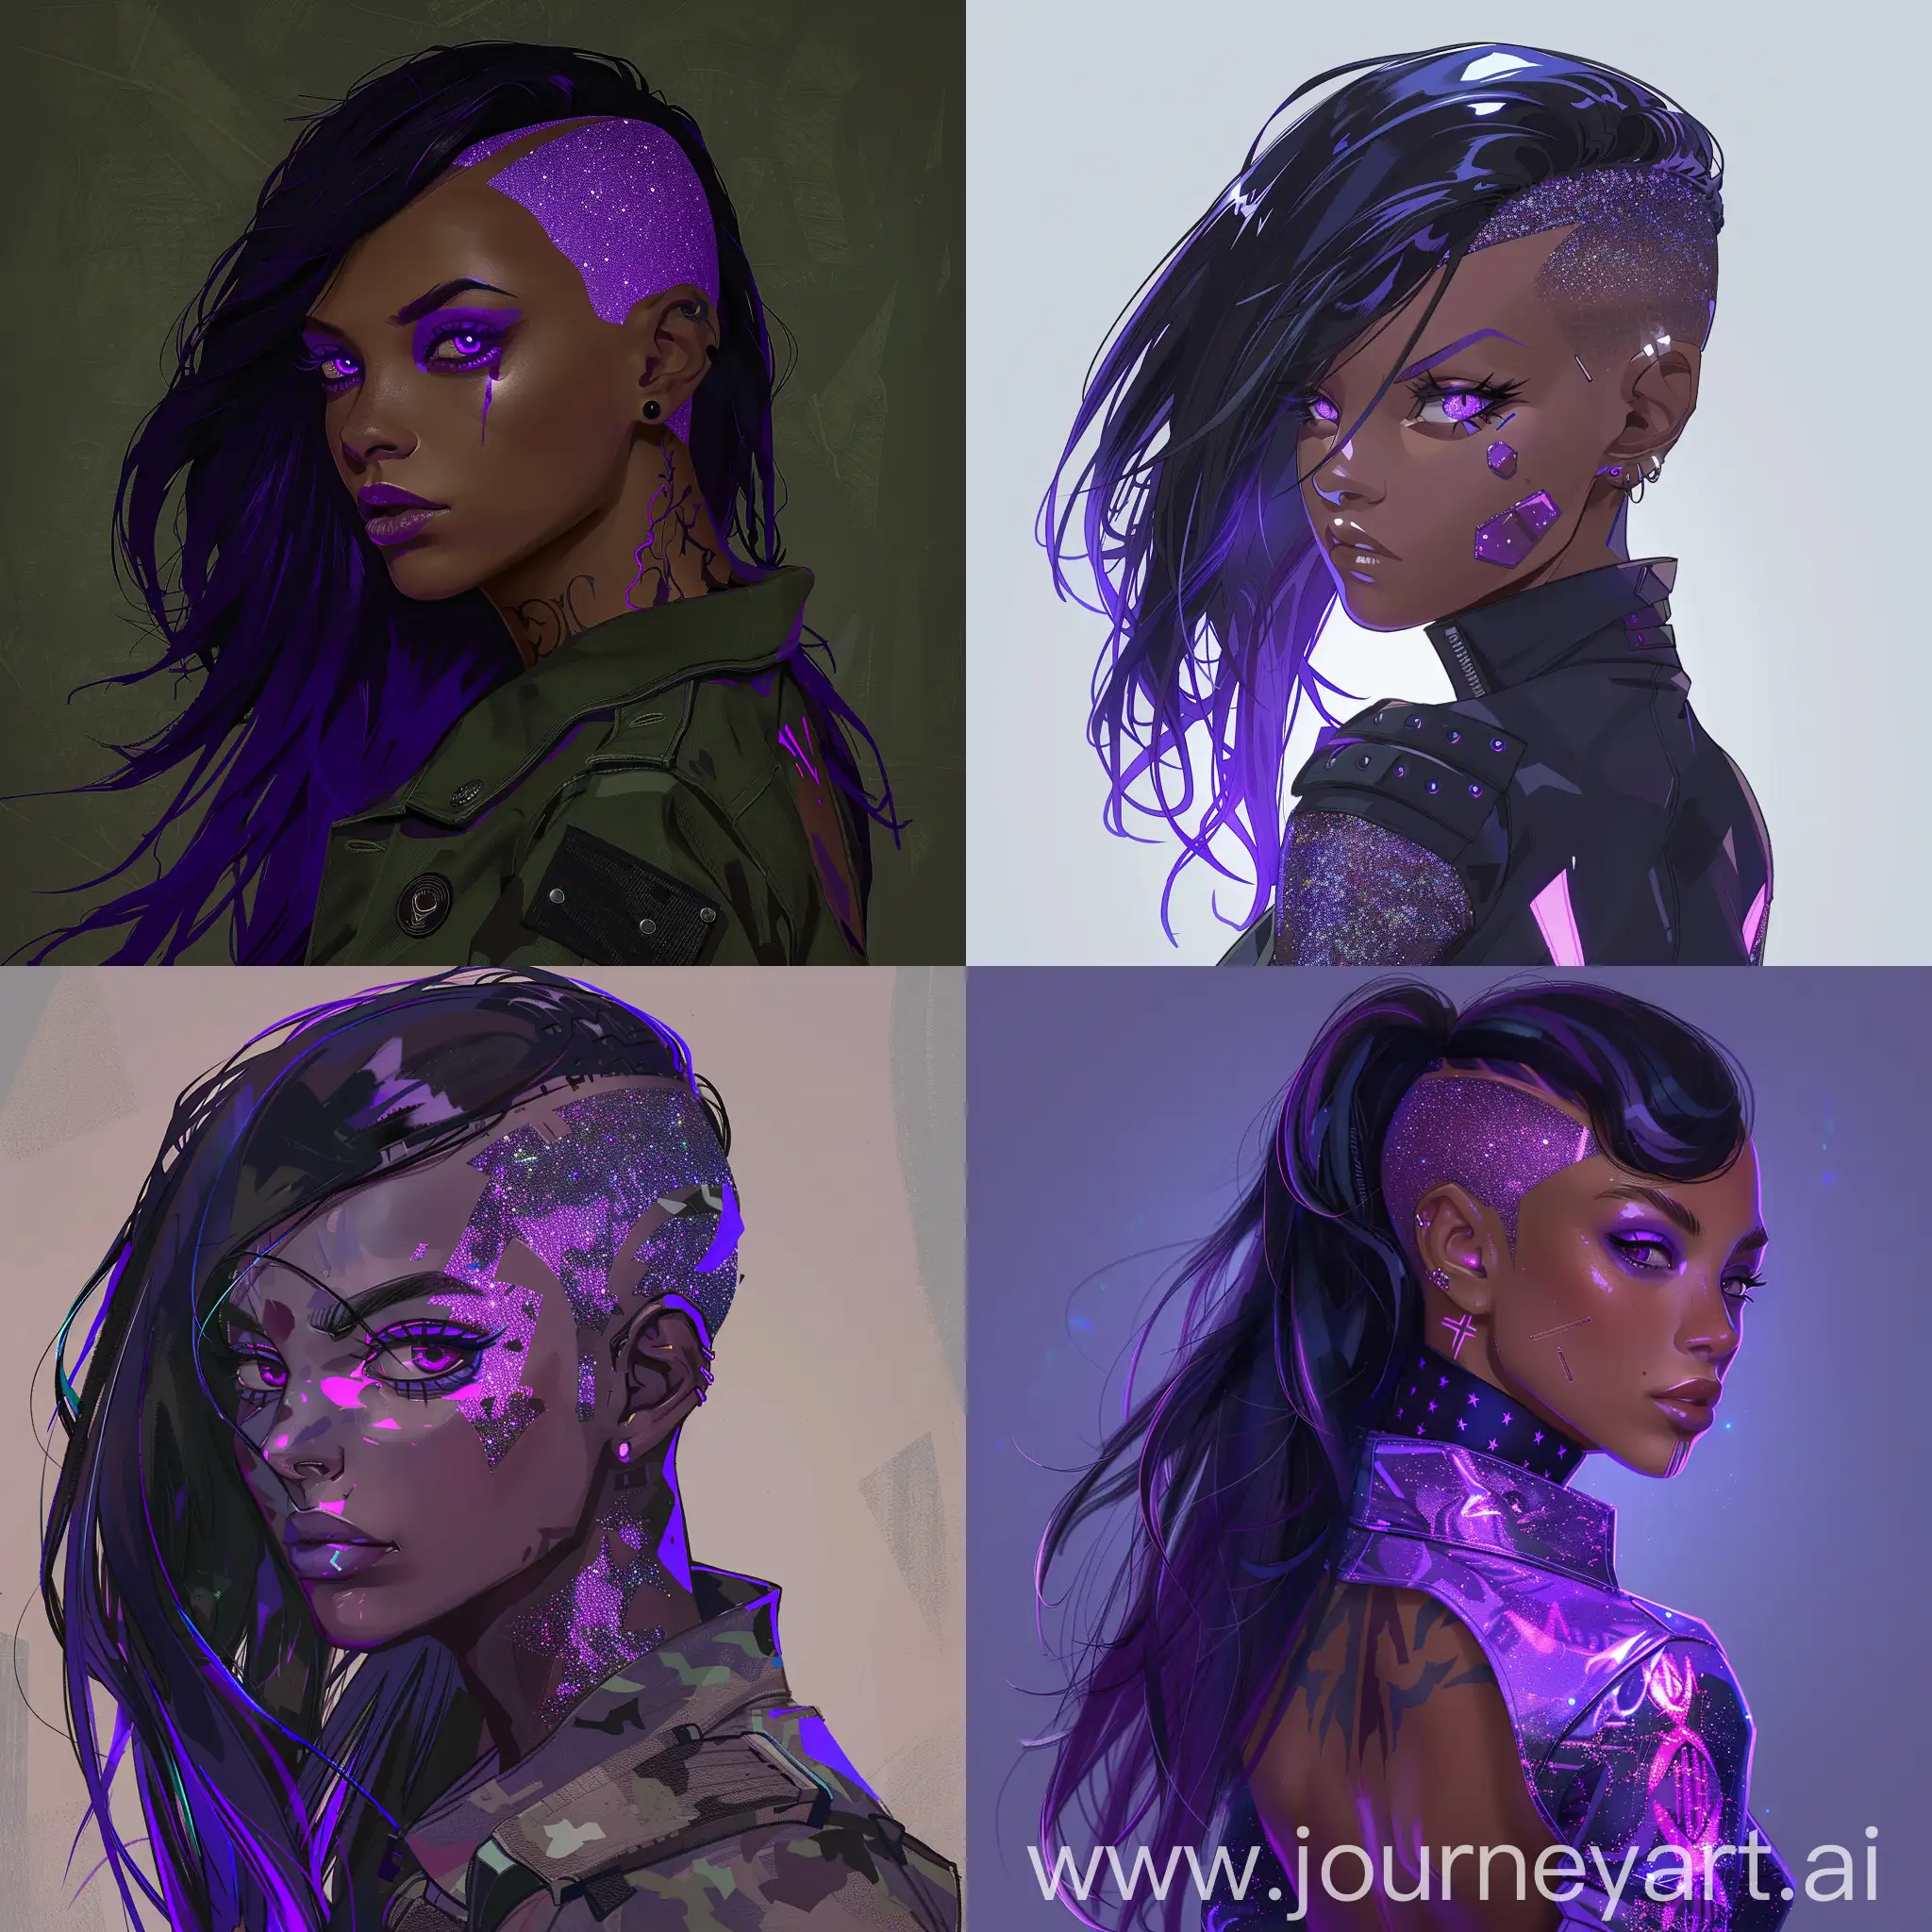 Race Profound, Female, Clothing Style Militaristic, Eye-purple color, unusually shaped irises, floor-length hair, strands on the sides, half shaved hair, Hair Color neon purple, glitter, full body, semi realism artstyle, anime artstyle, character reference